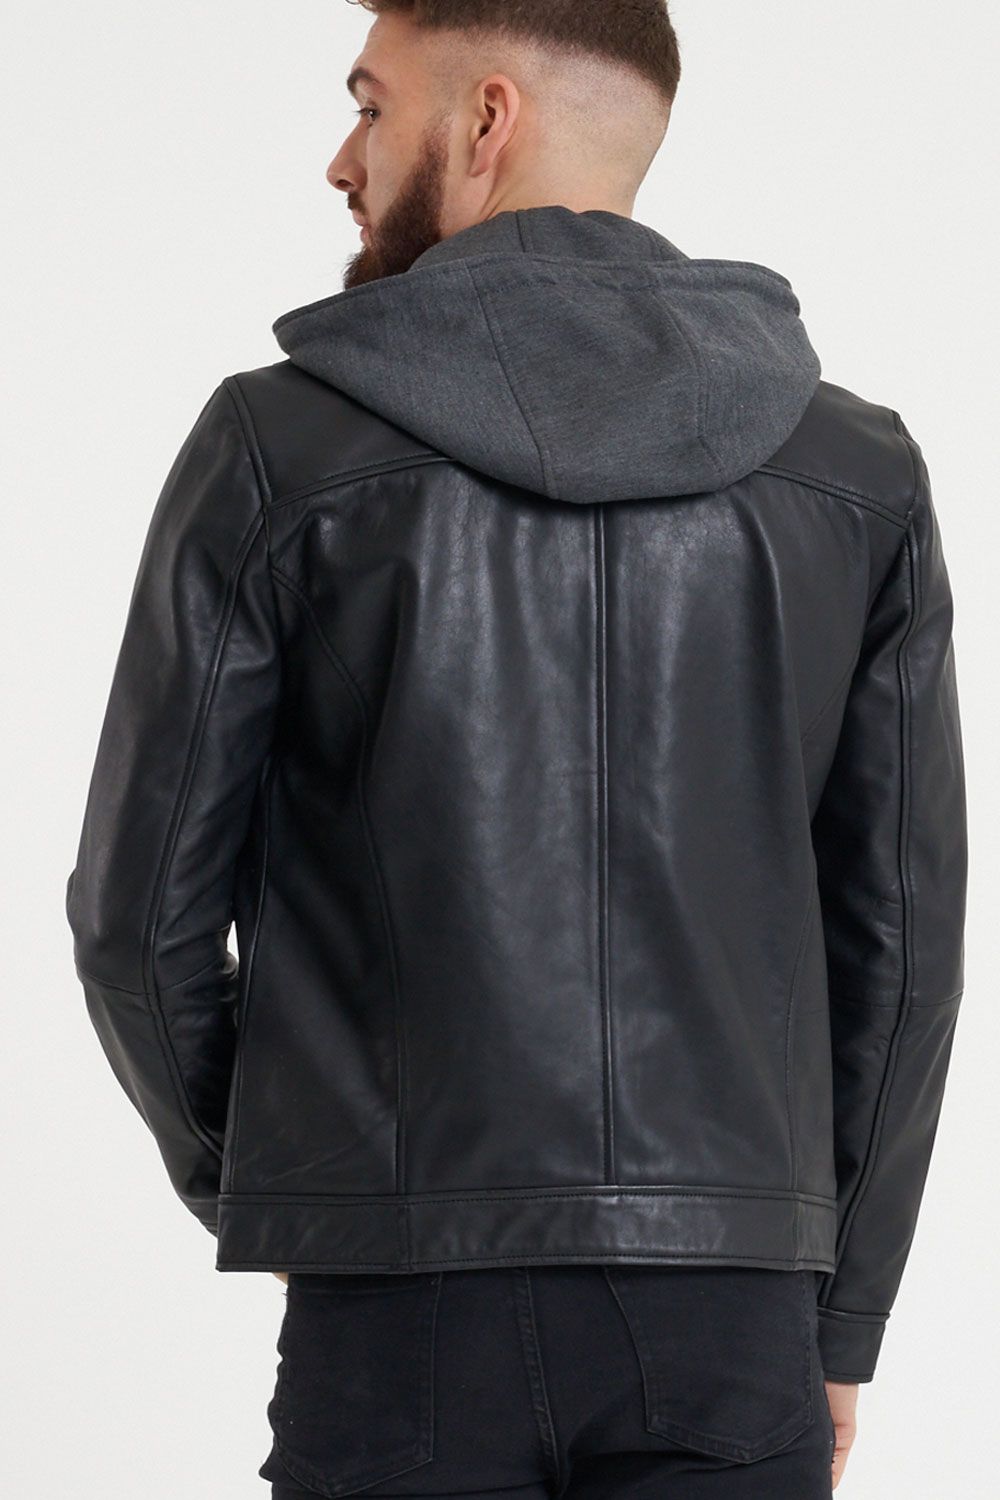 This black leather jacket features a grey jersey hood. The jacket has a symmetrical zipline which is the hallmark of all classic racer jackets. It is made from 100% soft sheep nappa leather.